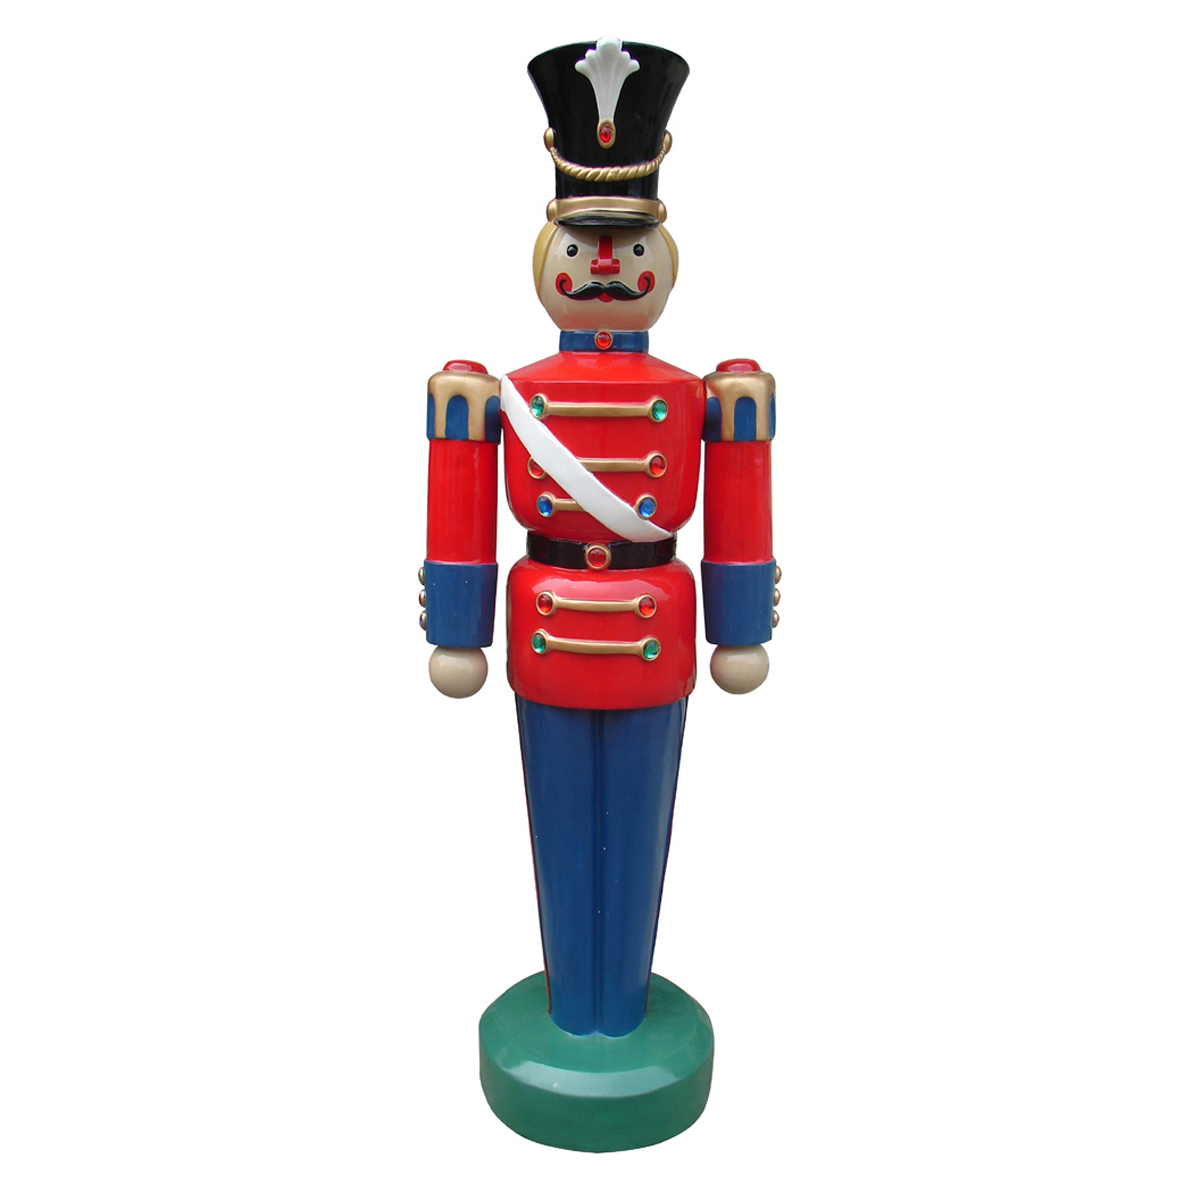 Toy Soldier with Jewels